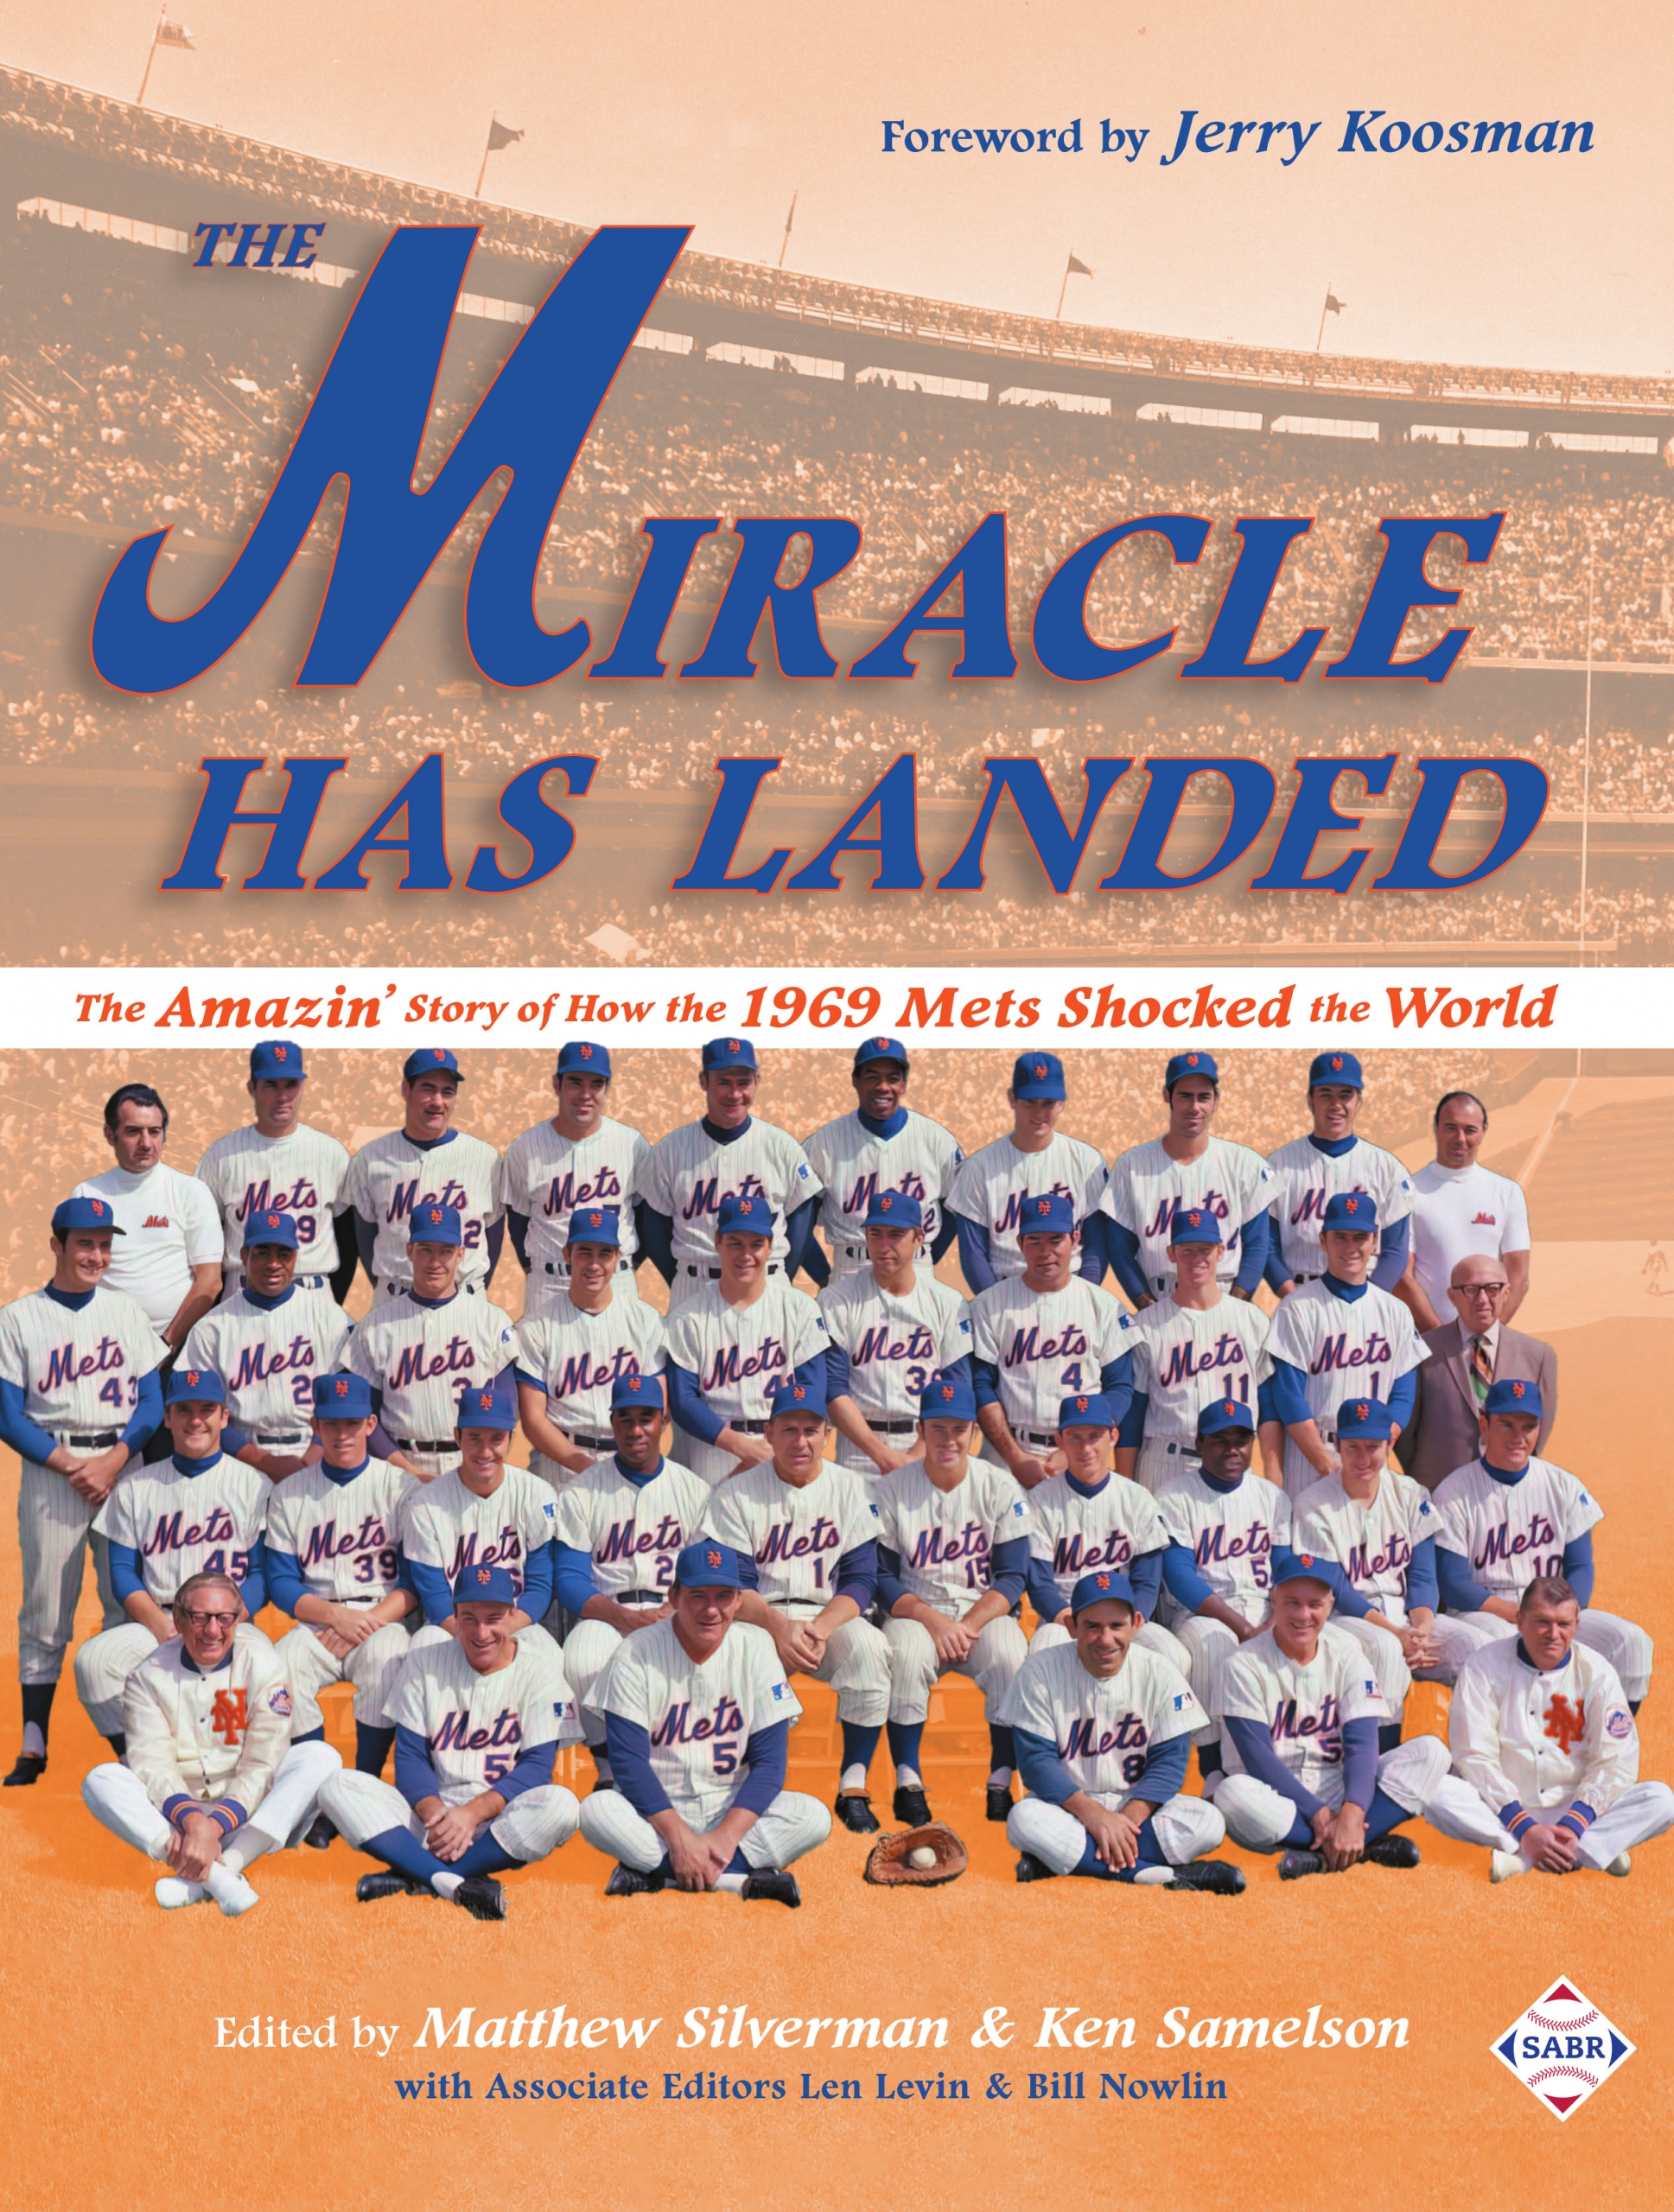 SABR Digital Library: The Miracle Has Landed: The Amazin' Story of